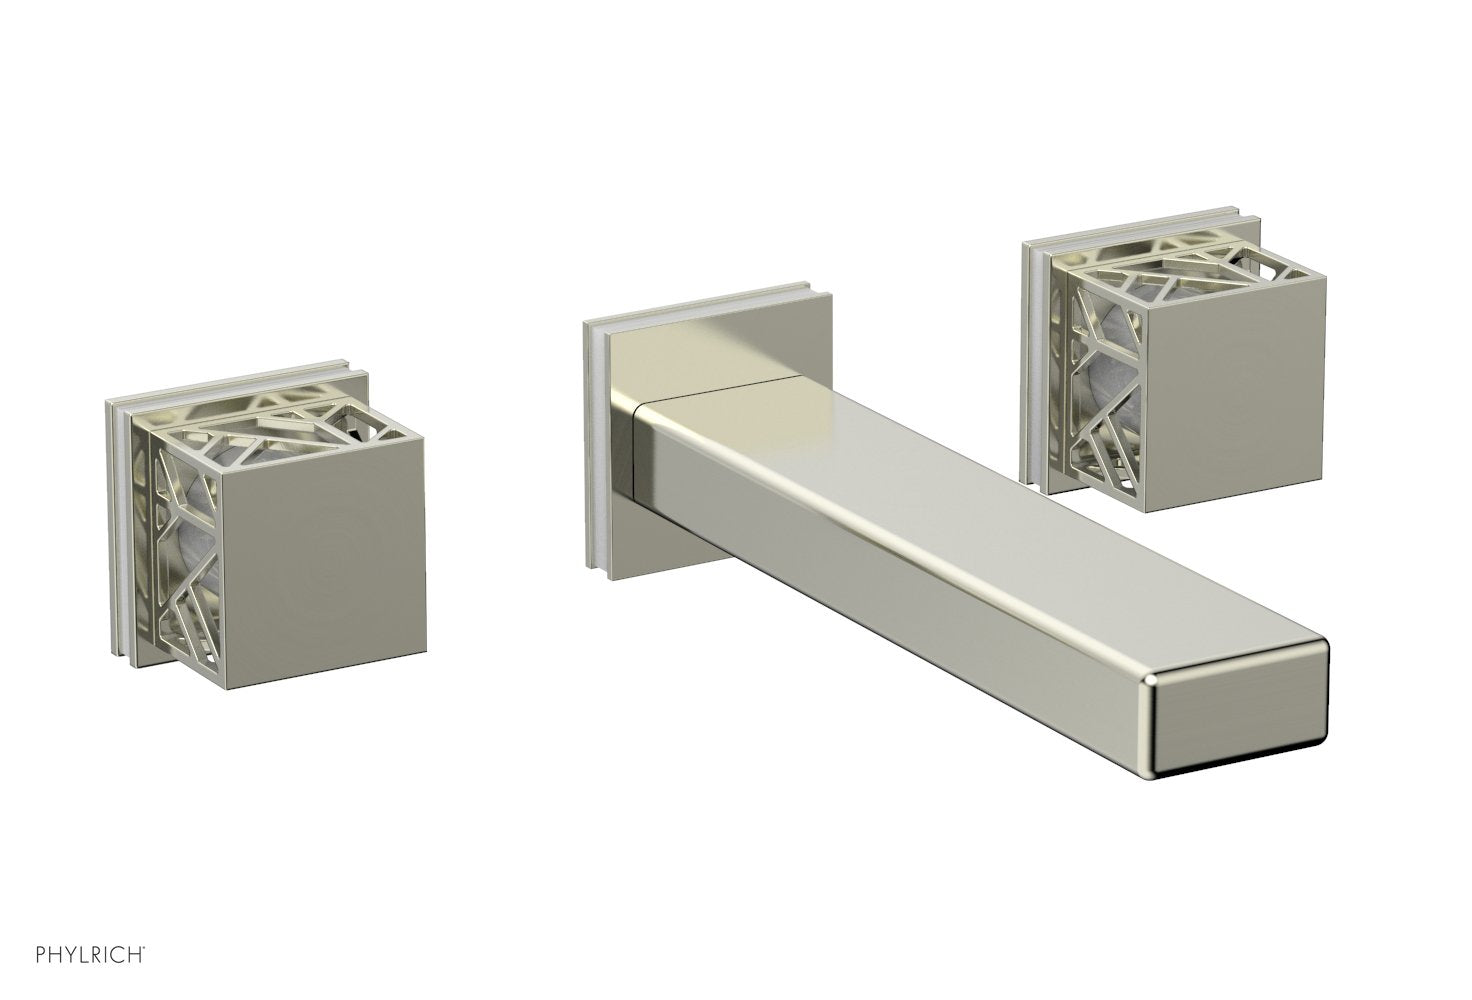 Phylrich JOLIE Wall Lavatory Set - Square Handles with "White" Accents